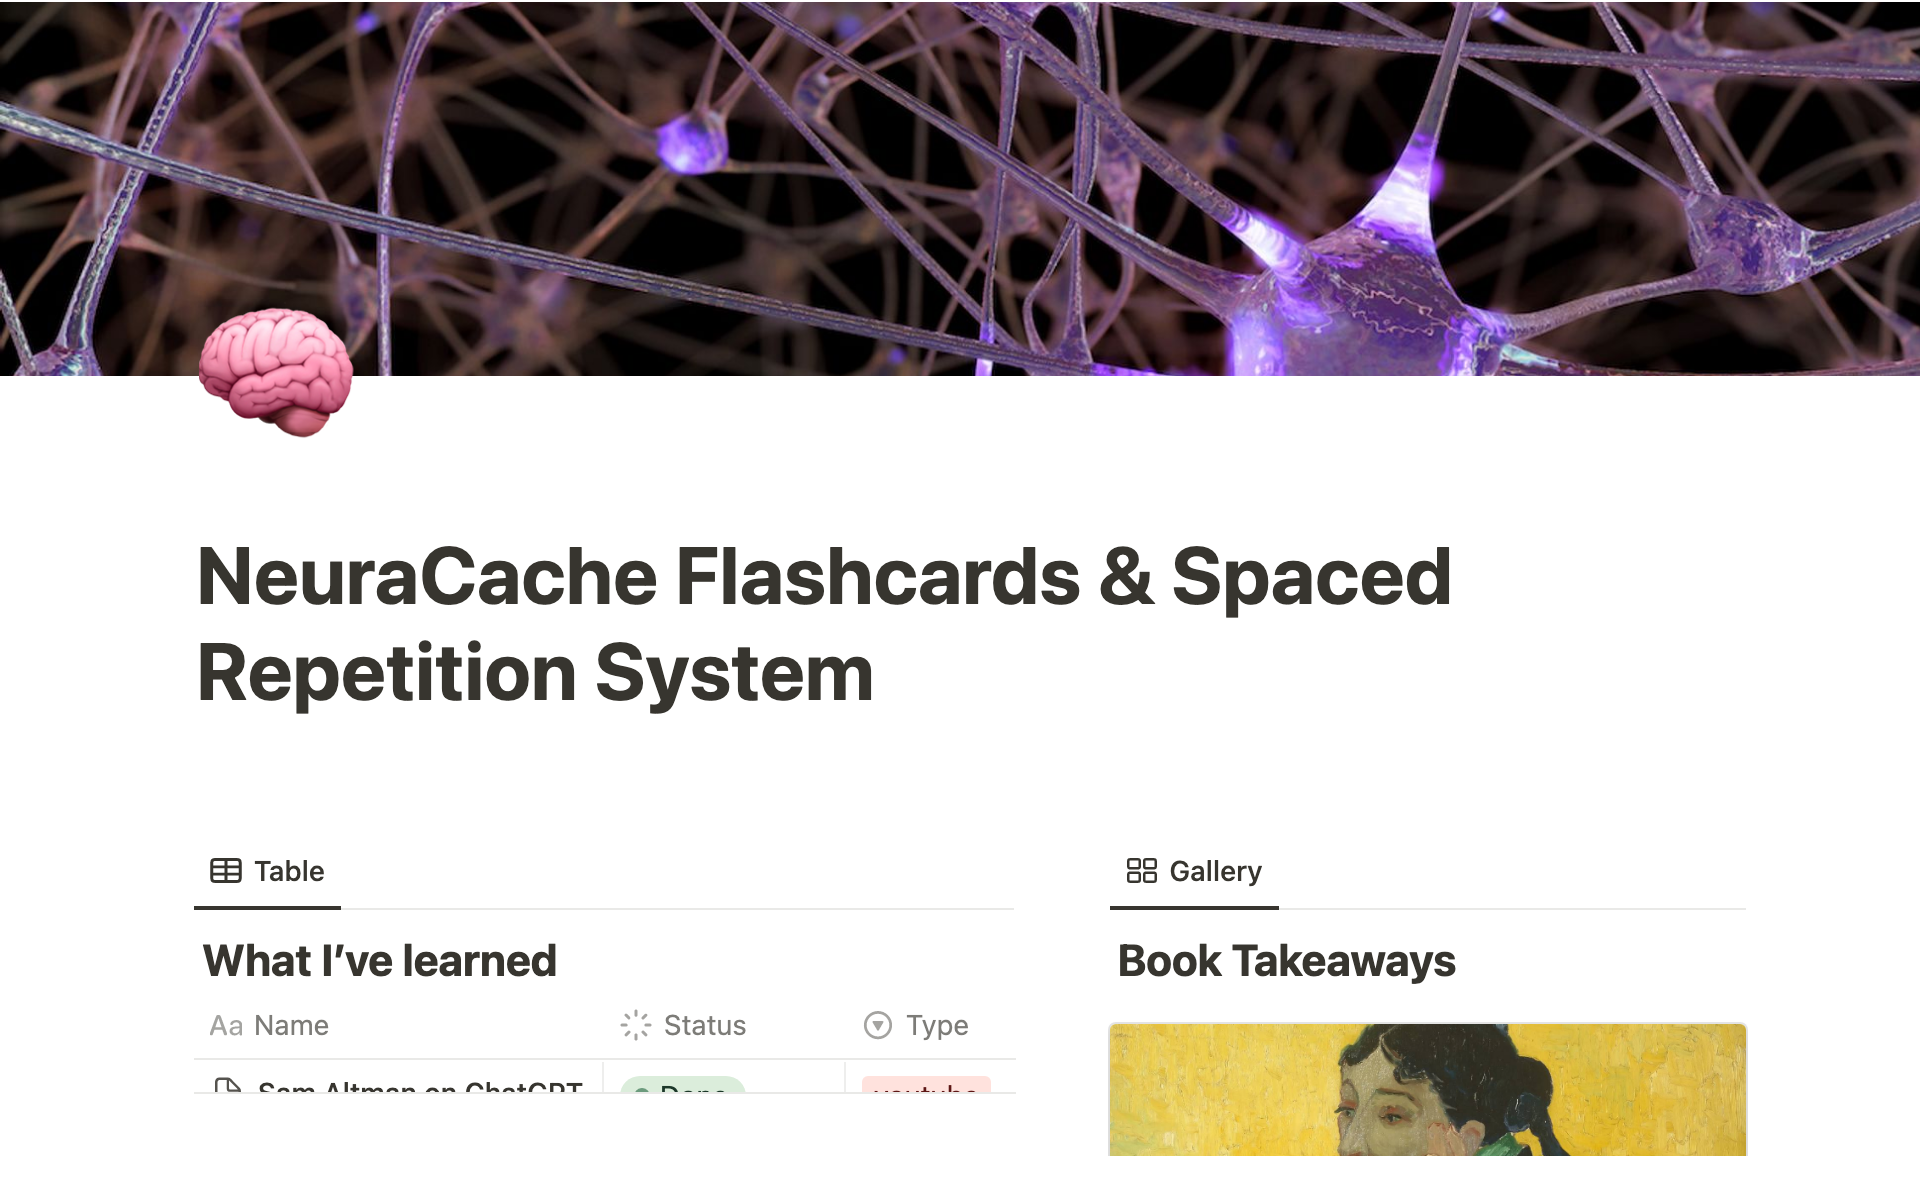 Flashcards & Spaced Repetition System